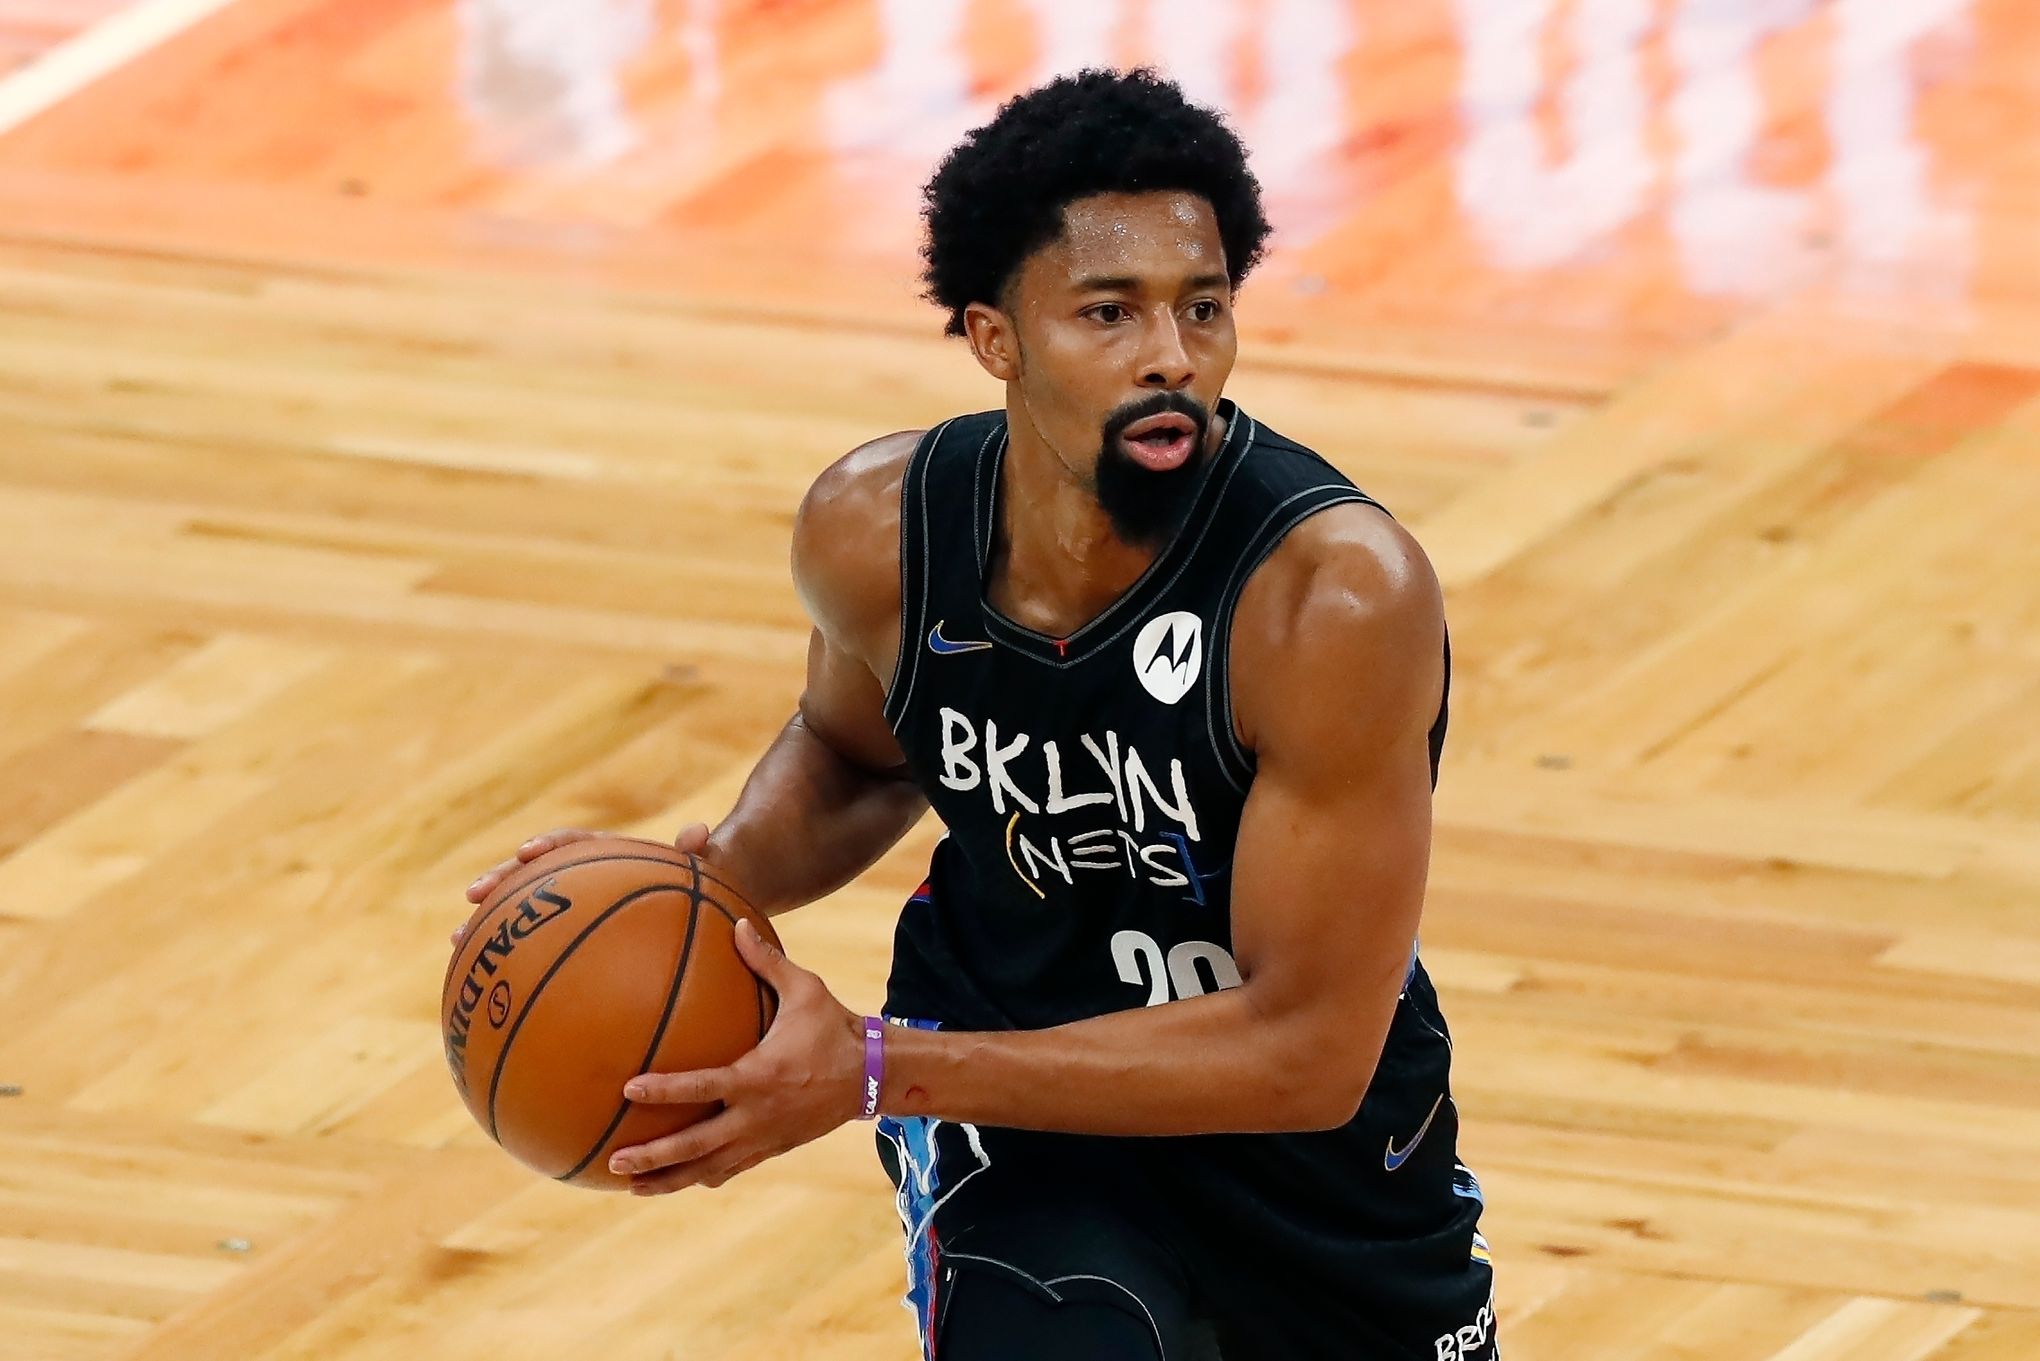 Nets' Spencer Dinwiddie says he has the most game-winners in NBA